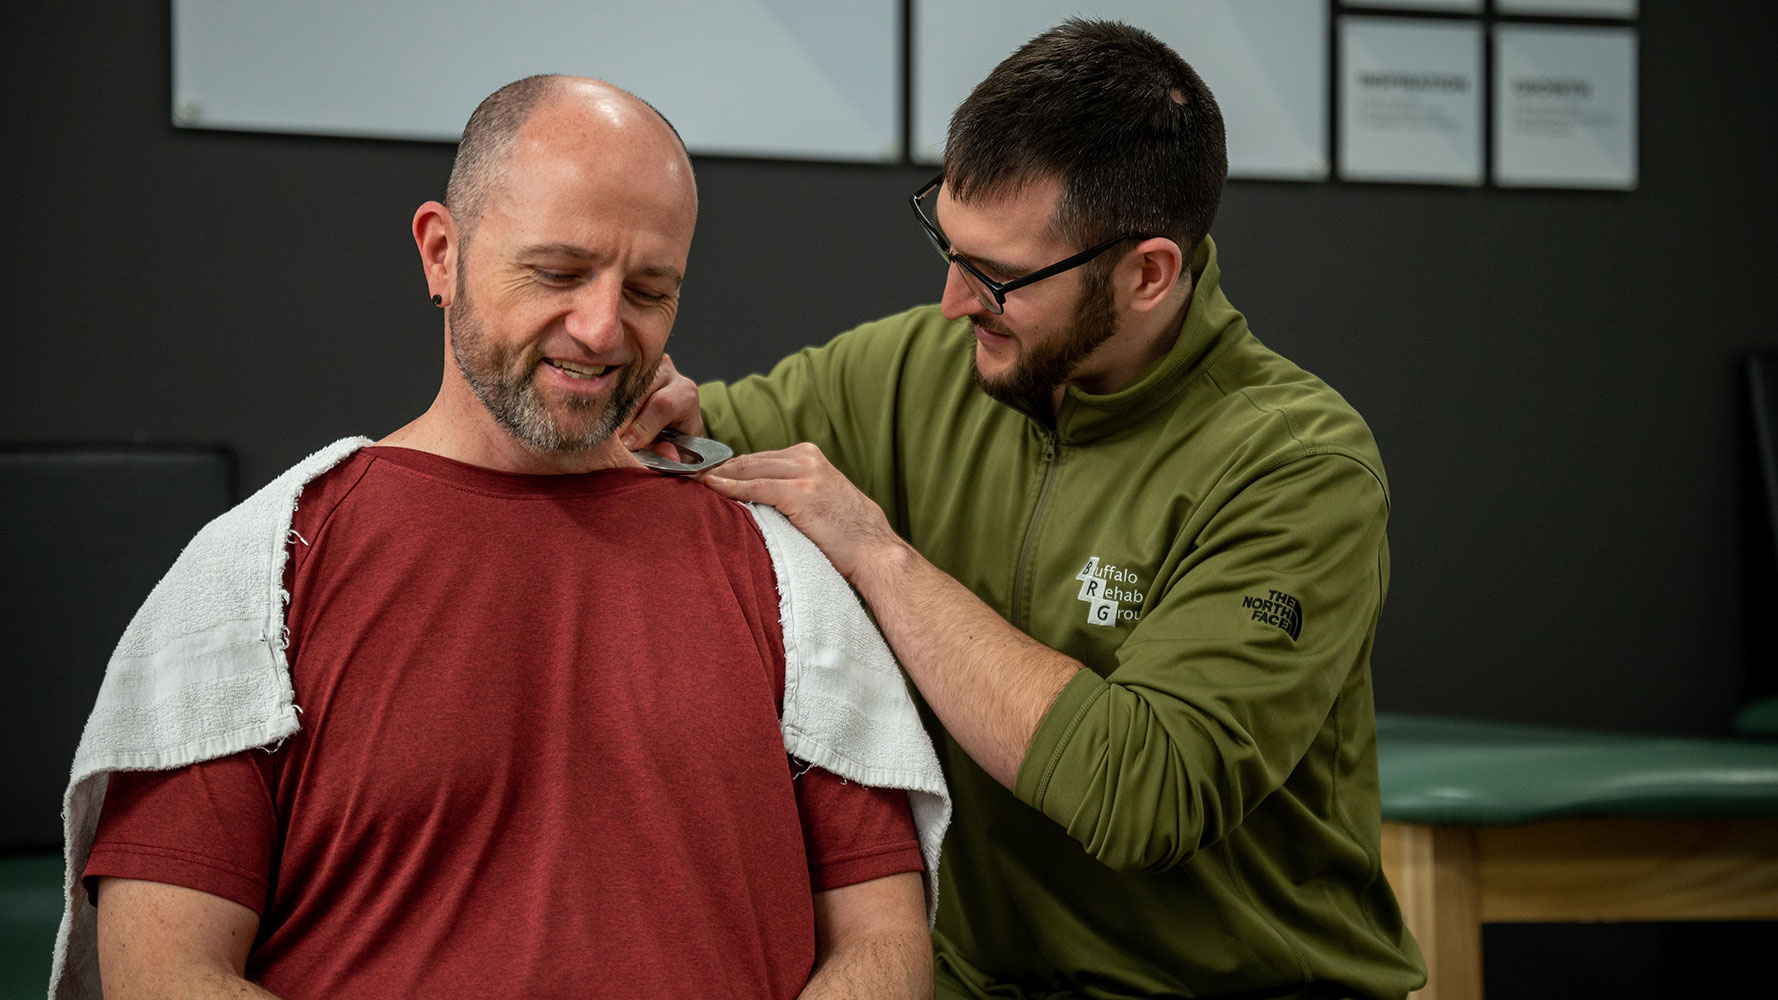 A physical therapist rubs the shoulders of his smiling patient.